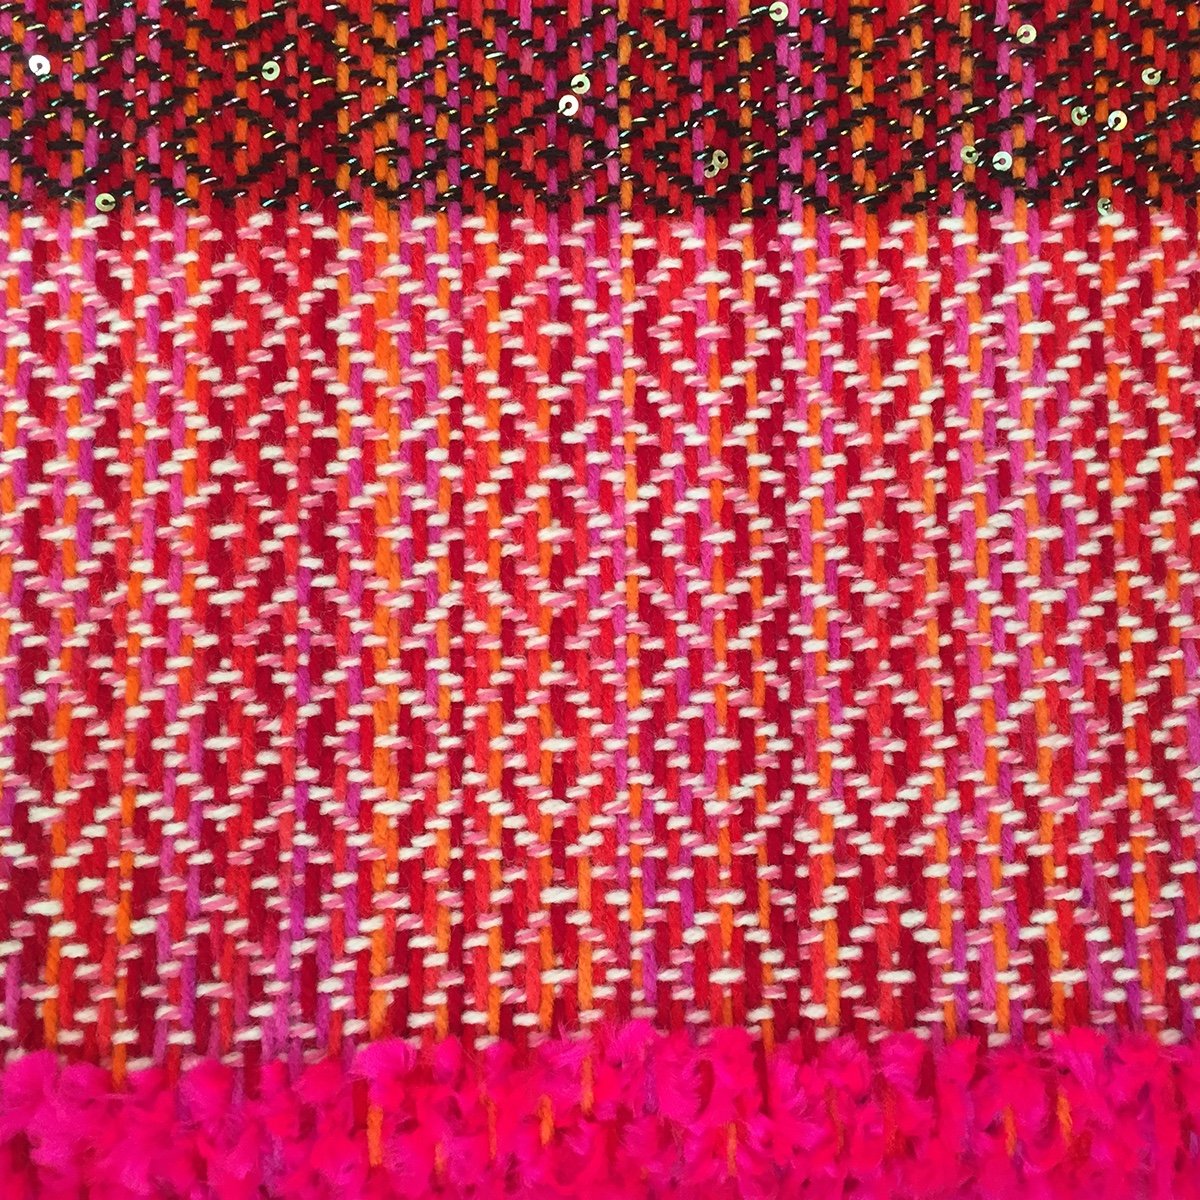 weaving wovenfabric colorful Fun bright yarn crazy girlie pink